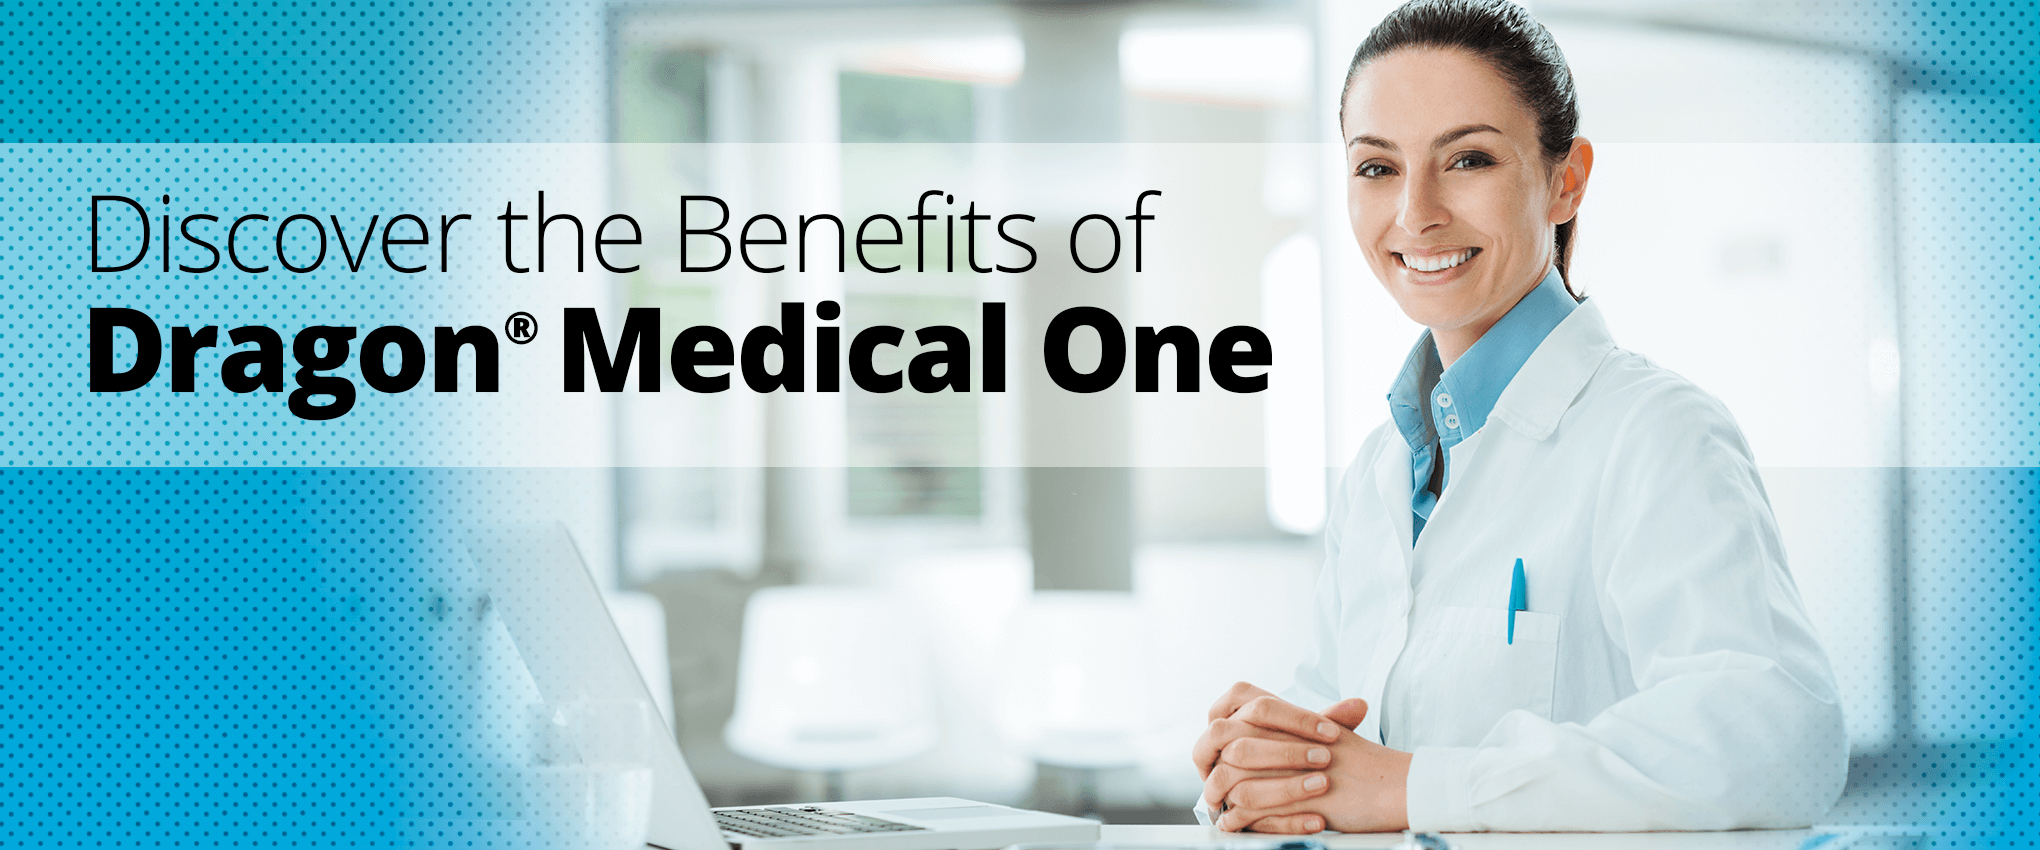 Discover the benefits of Dragon Medical One